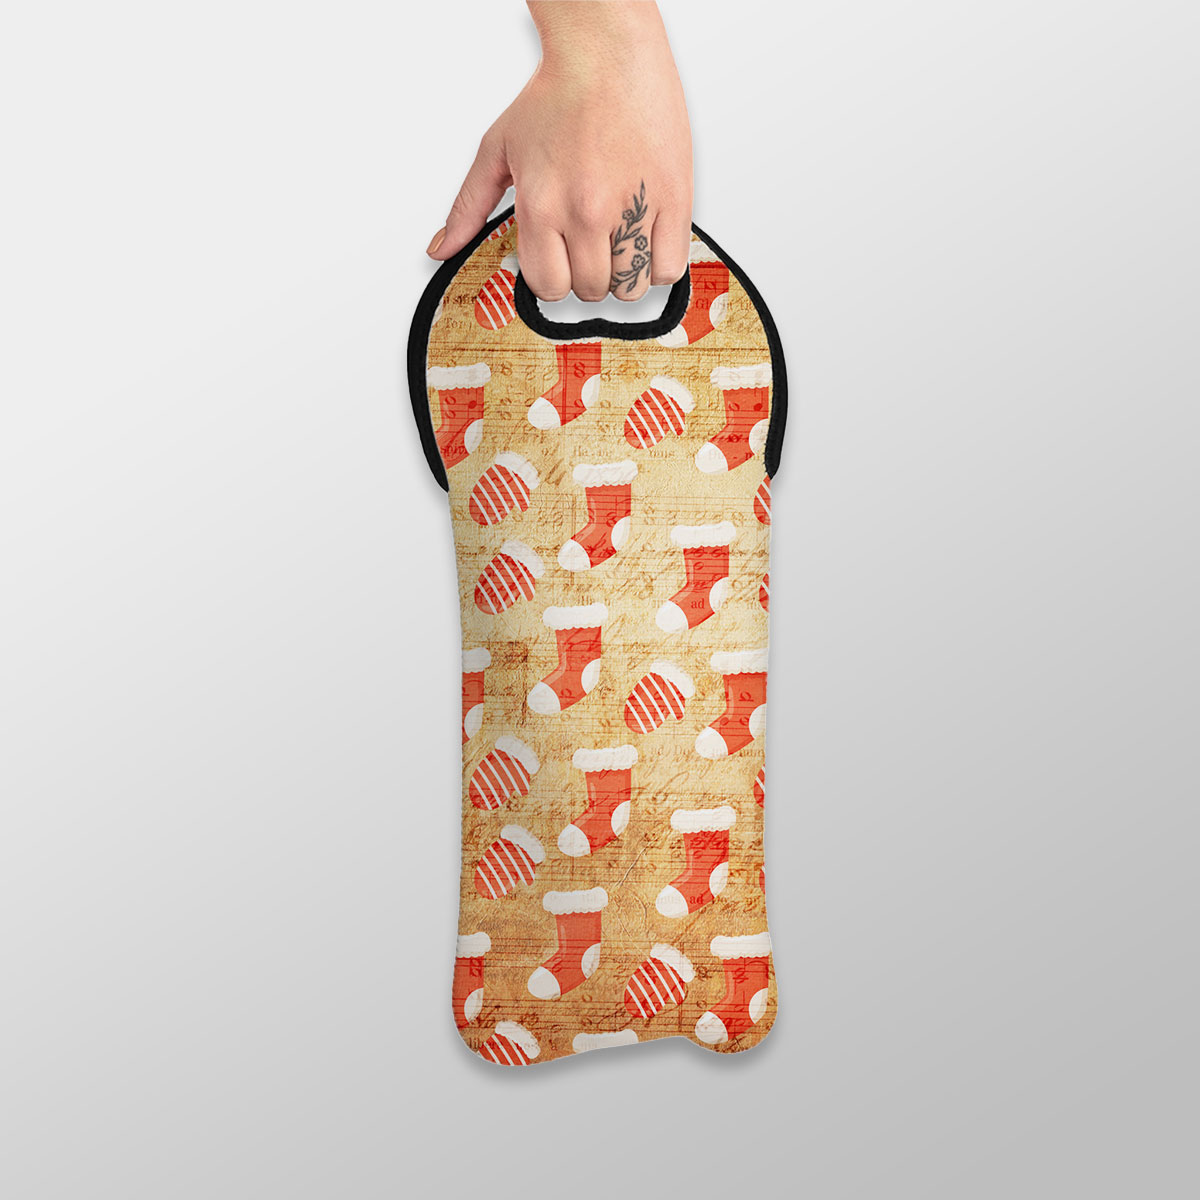 Red Socks And Christmas Oven Mitts Wine Tote Bag